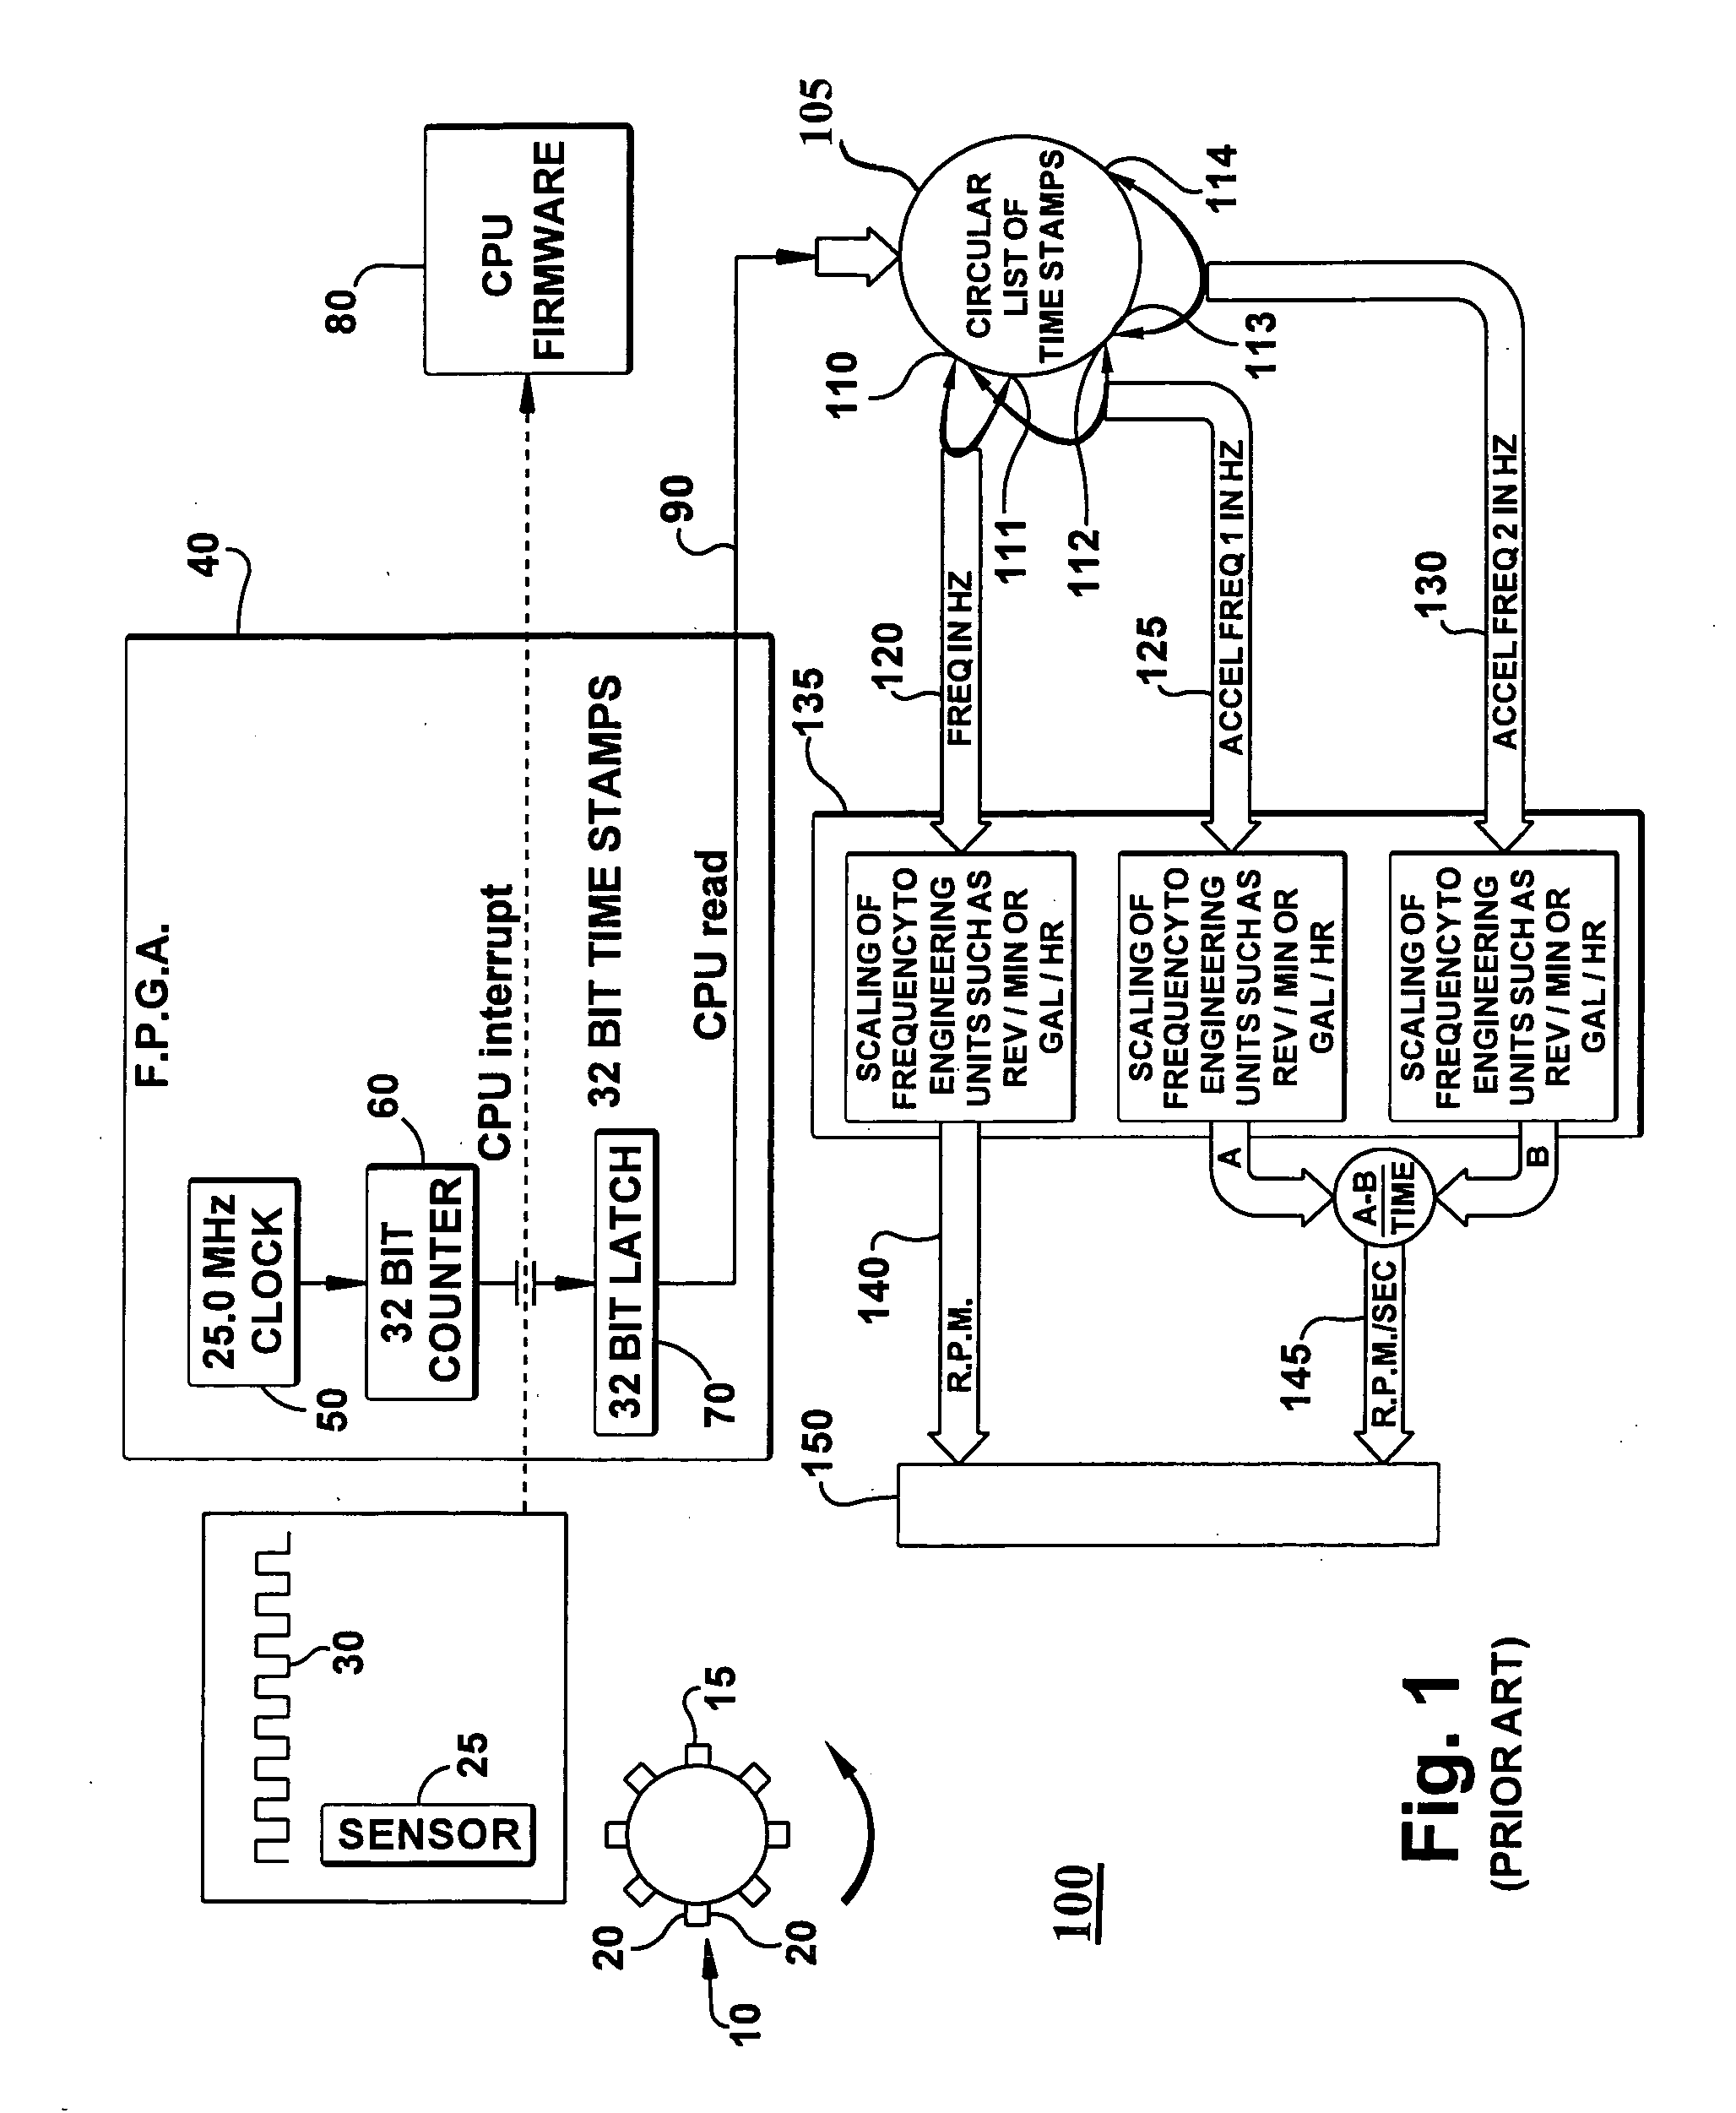 Method and system for accuracy of speed and acceleration measurements on rotating machinery with a speed wheel